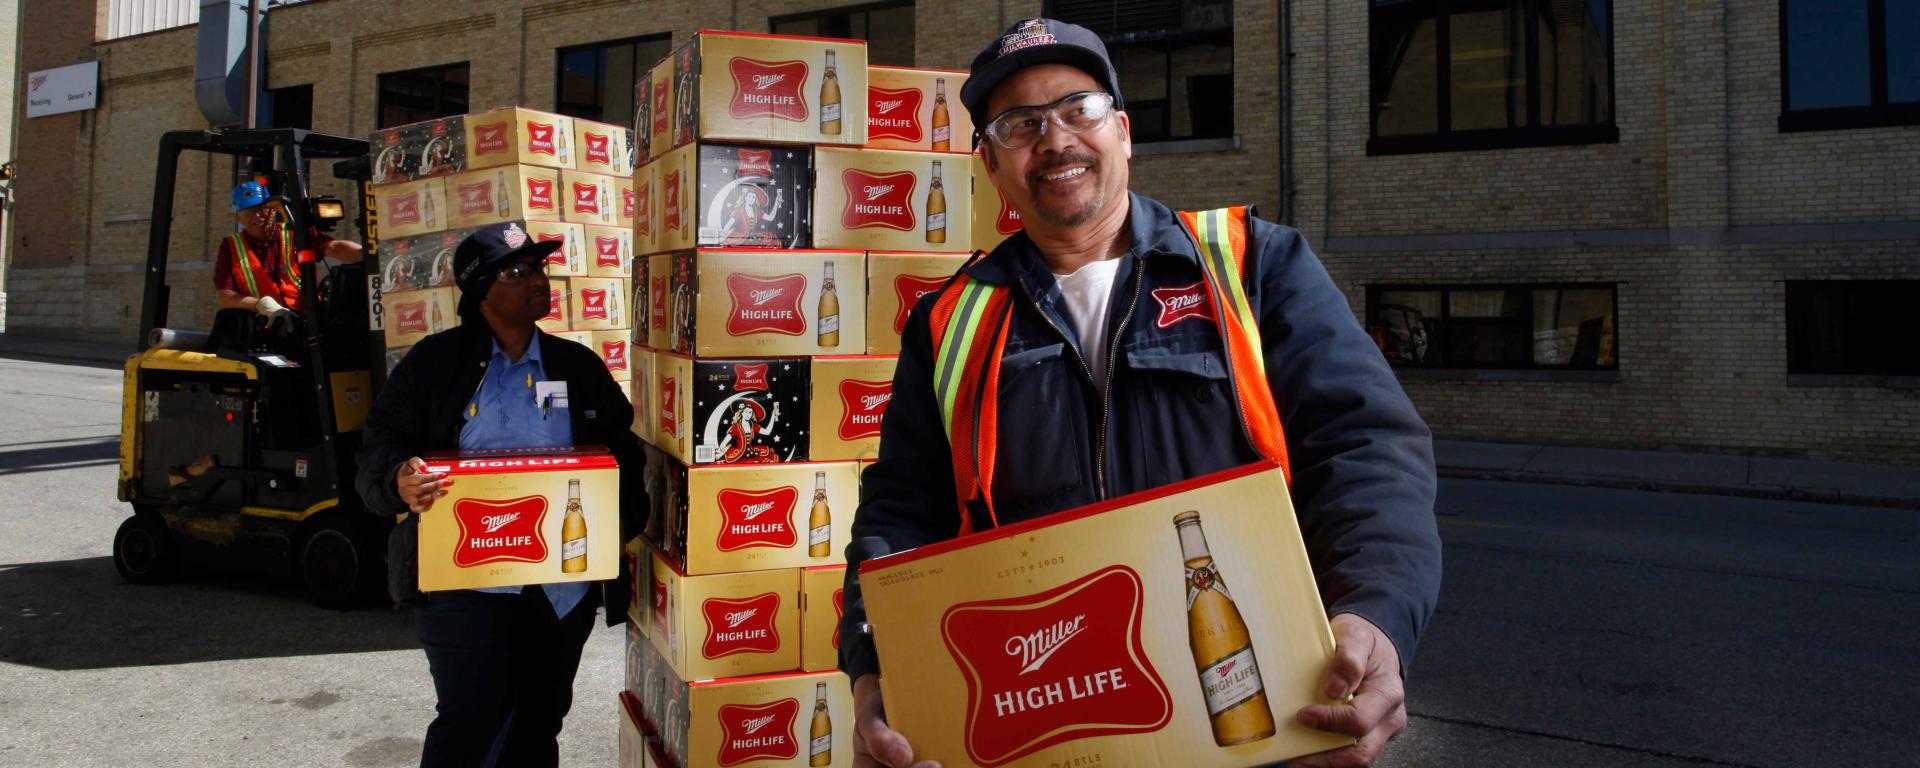 Employees holding Miller High life boxes 